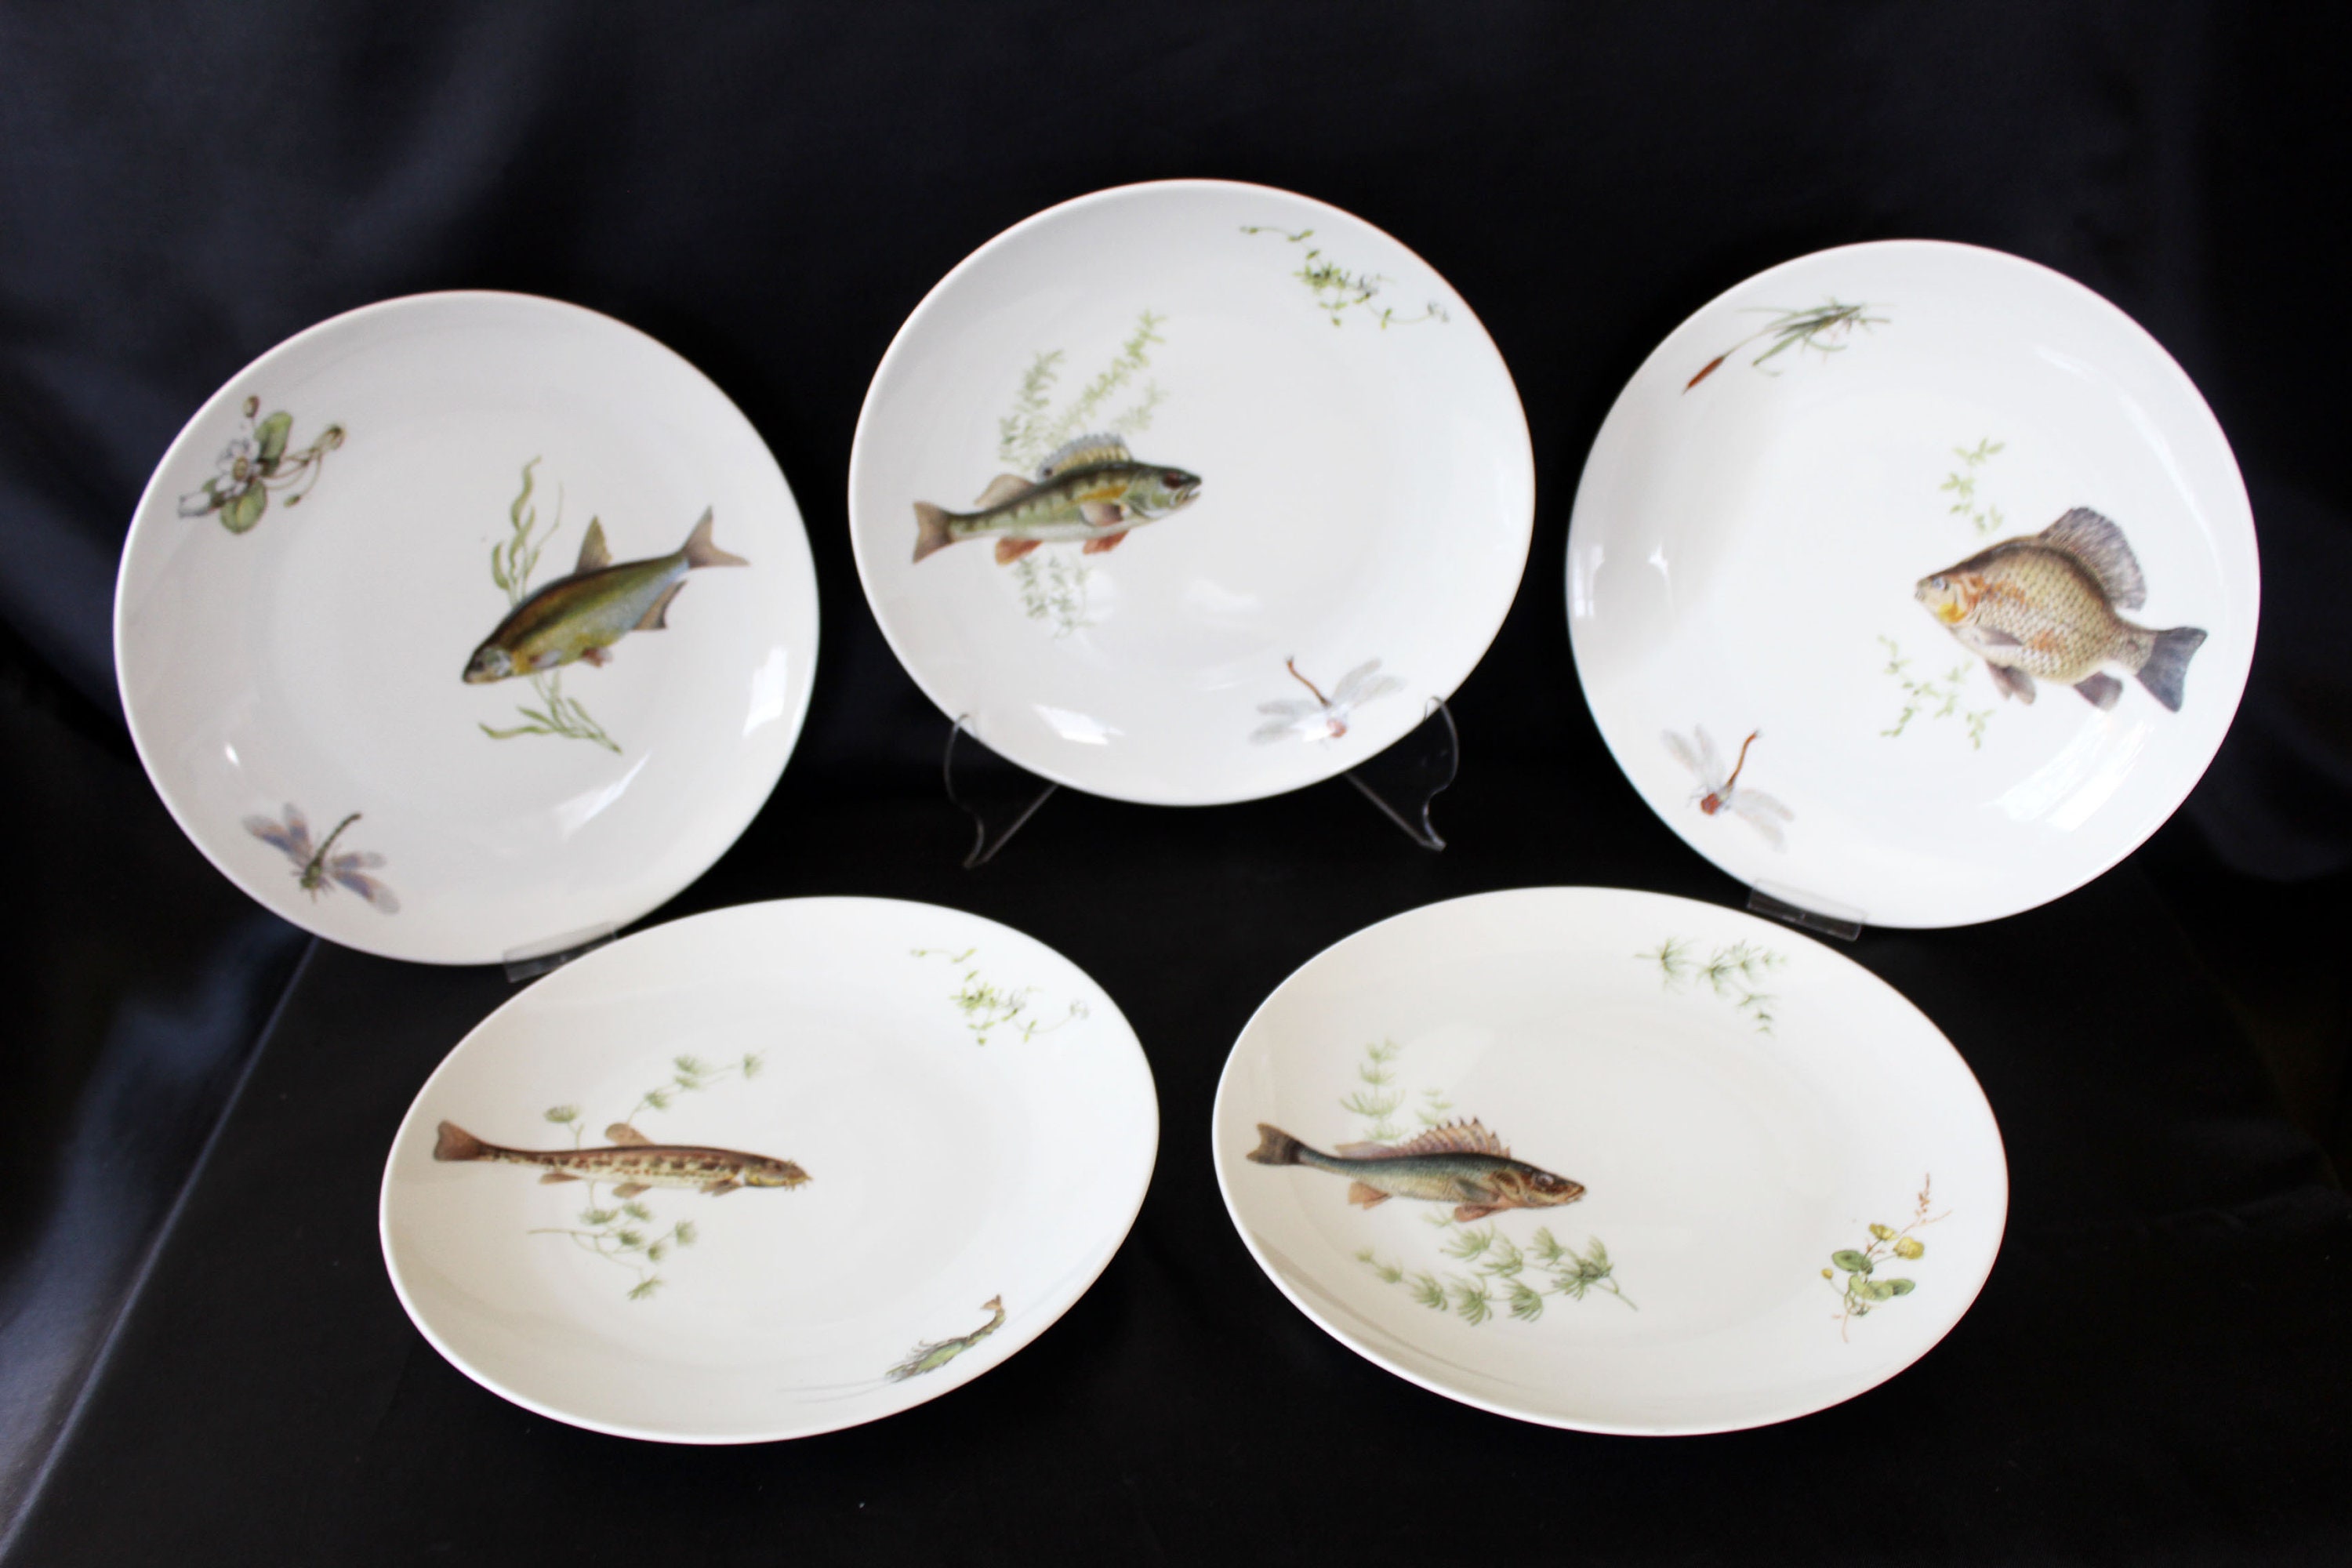 5 Vintage Porcelain German Bareuther Bavaria Ambleve Serving Plates, Seafood Plate, Fish Scenic Water Views, Dinner Dragonfly